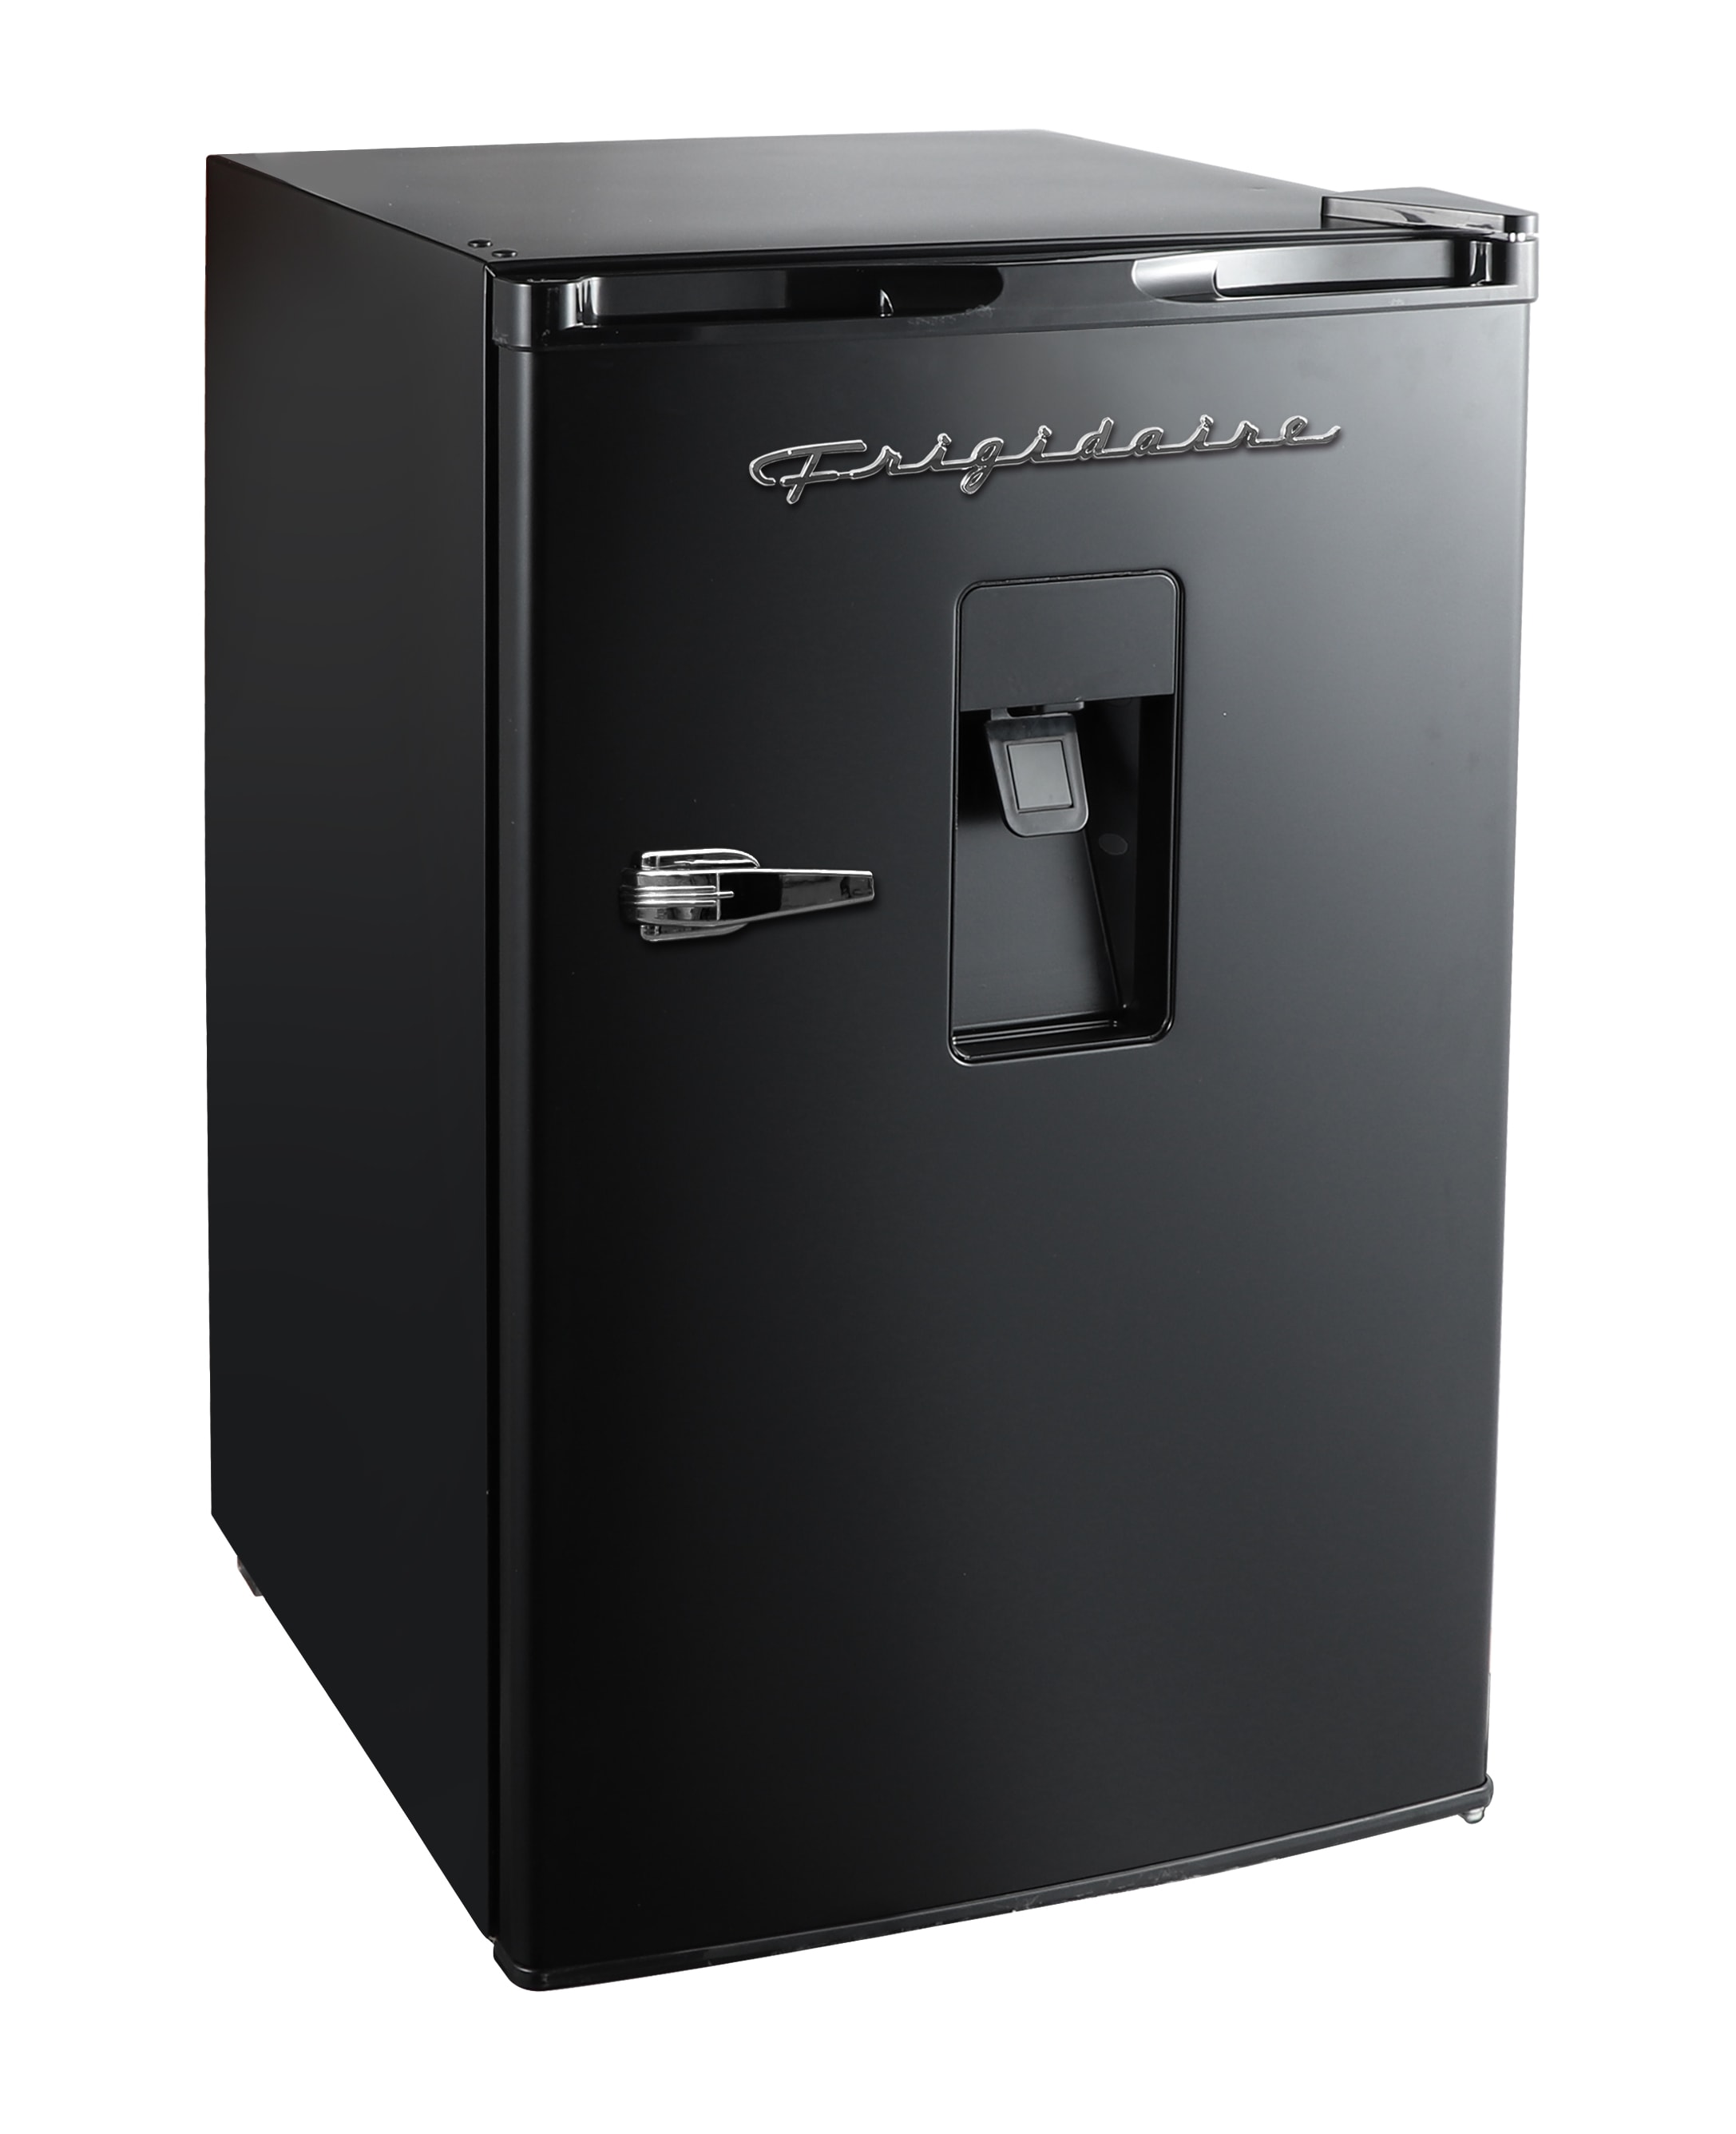 Hisense refrigerator 4.4 at Lowes.com: Search Results